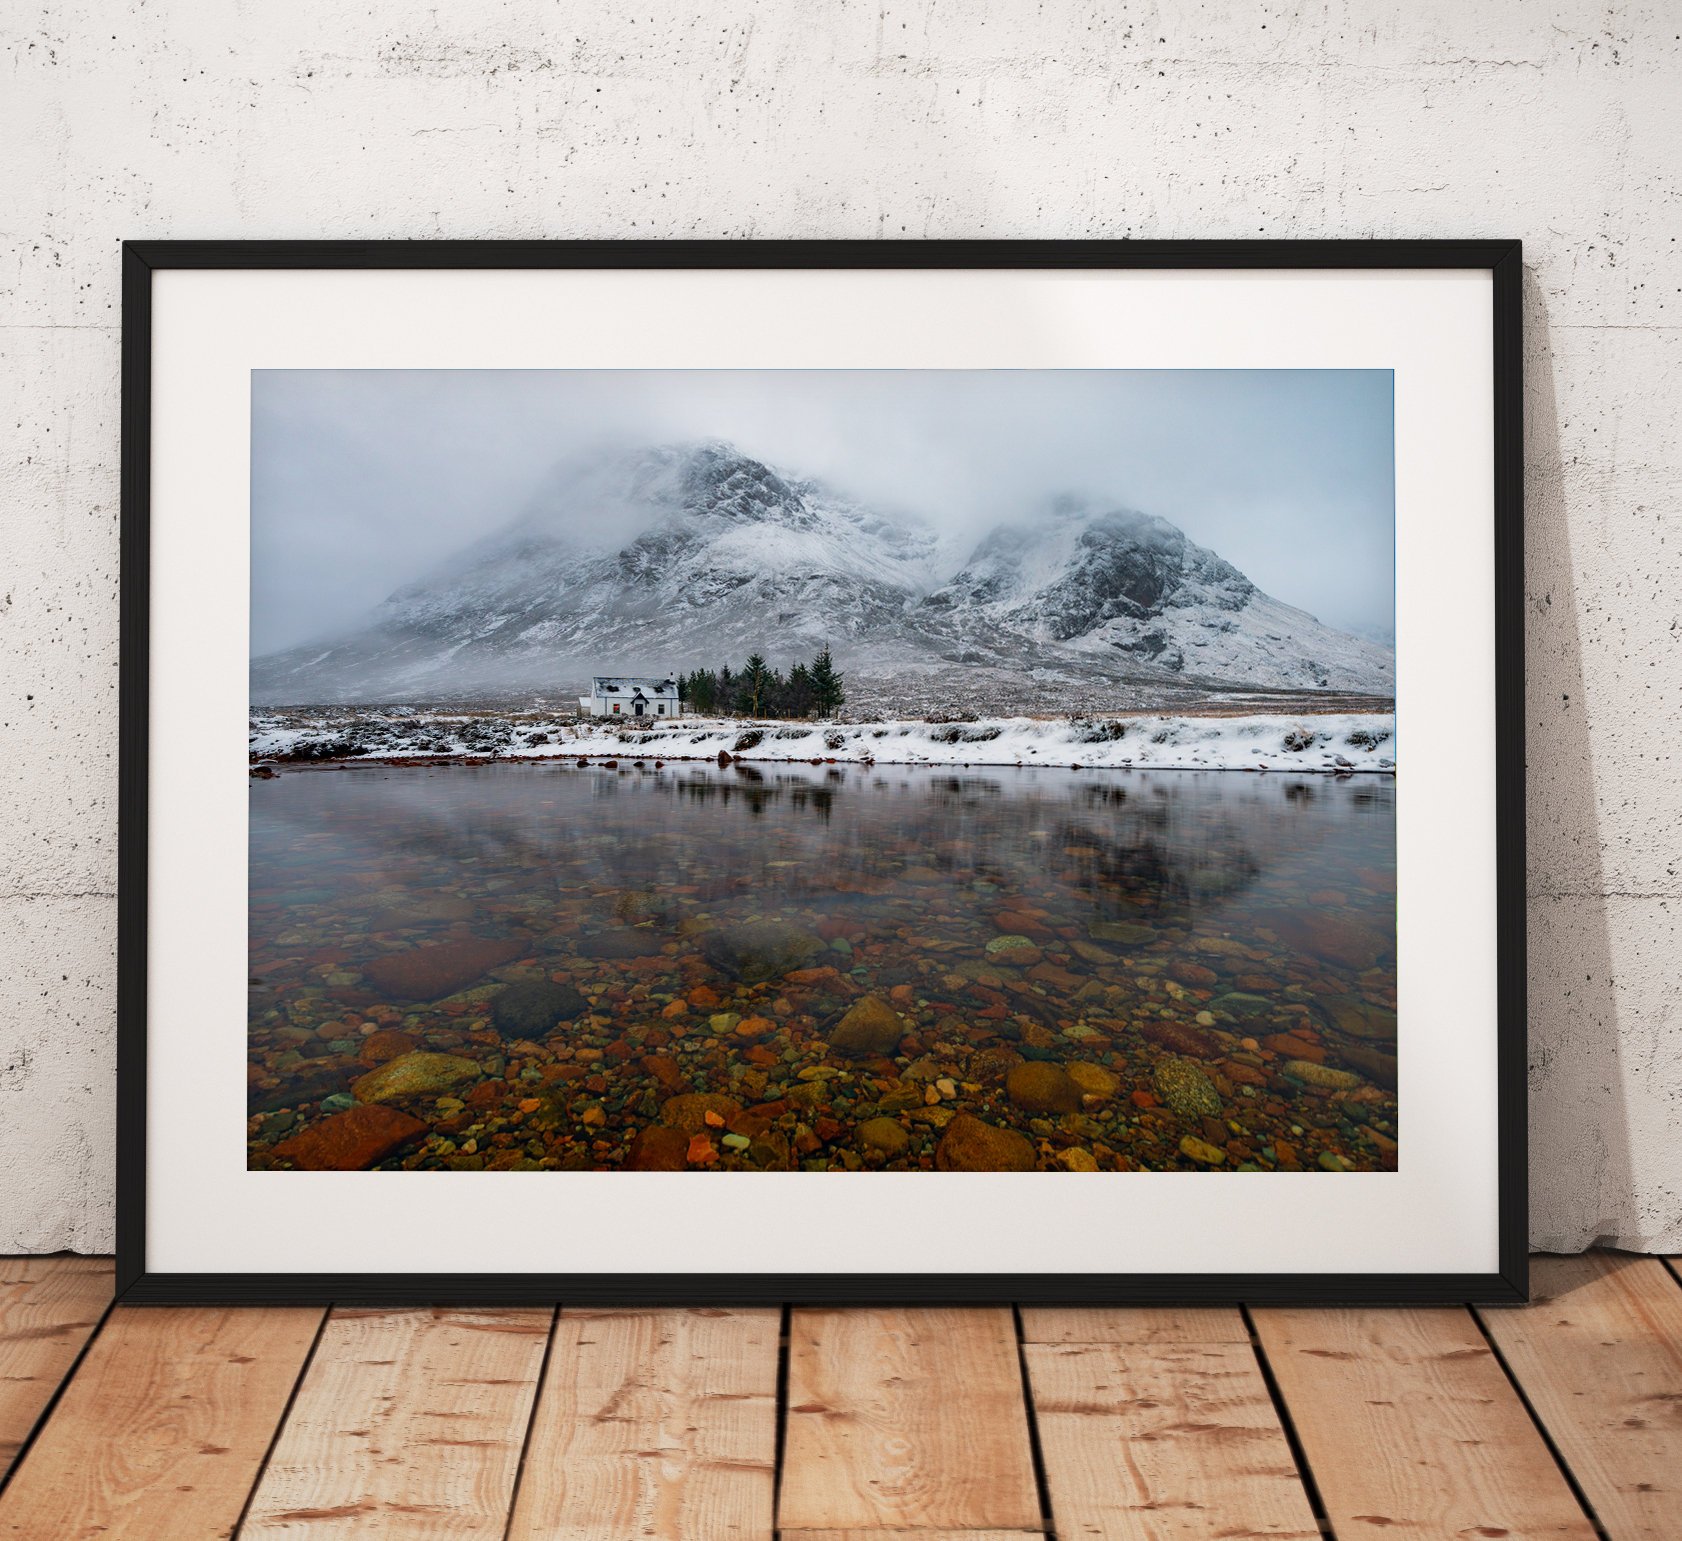 Buachaille Etve Mor mountain and climbers cottage in Glencoe , Scottish Highlands. Photo print